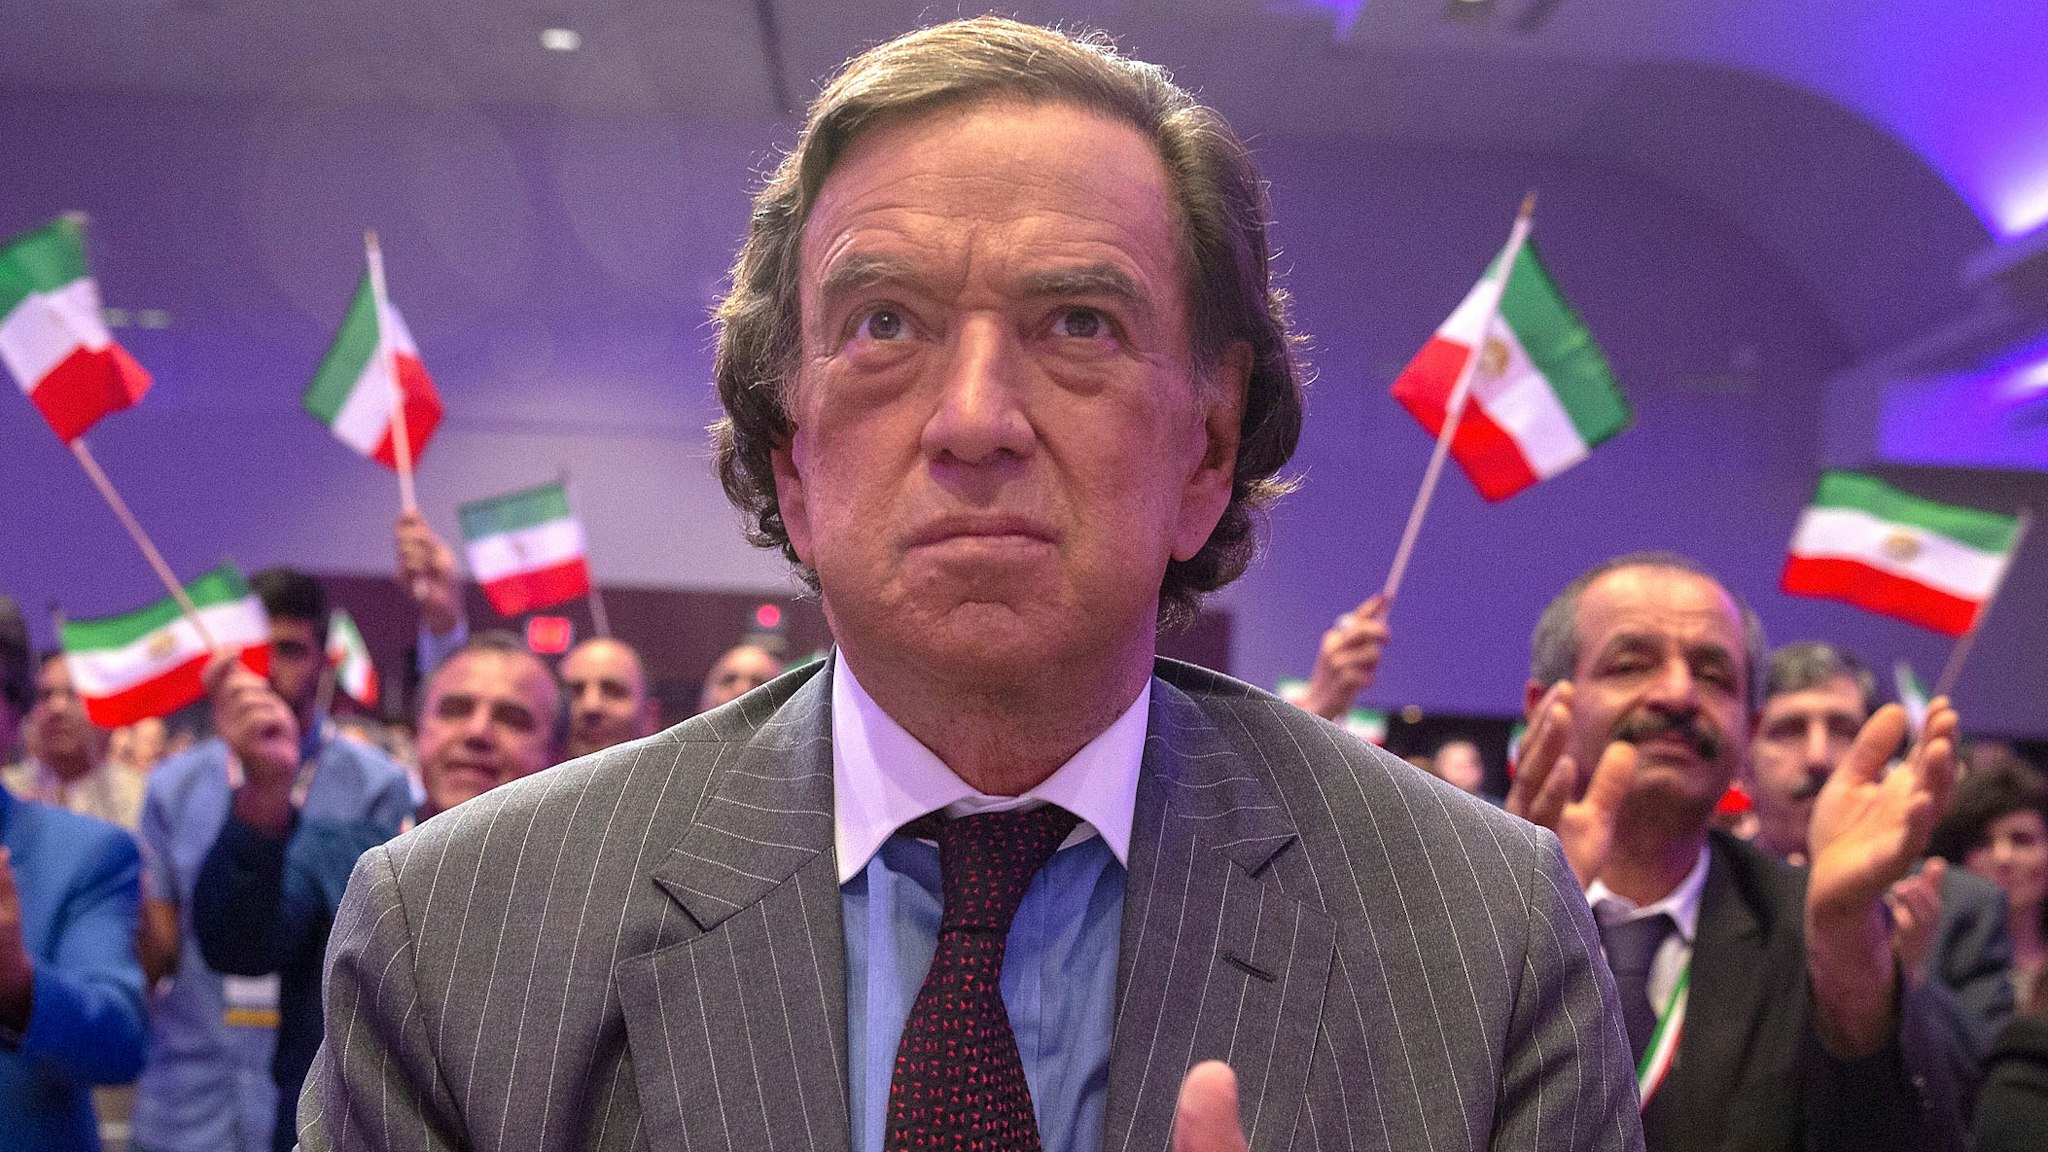 WASHINGTON, DC - MAY 05: Former Governor of New Mexico Bill Richardson attends at the Conference on Iran on May 5, 2018 in Washington, DC. Over one thousand delegates from representing Iranian communities from forty states attends the Iran Freedom Convention for Human Rights and Democracy.